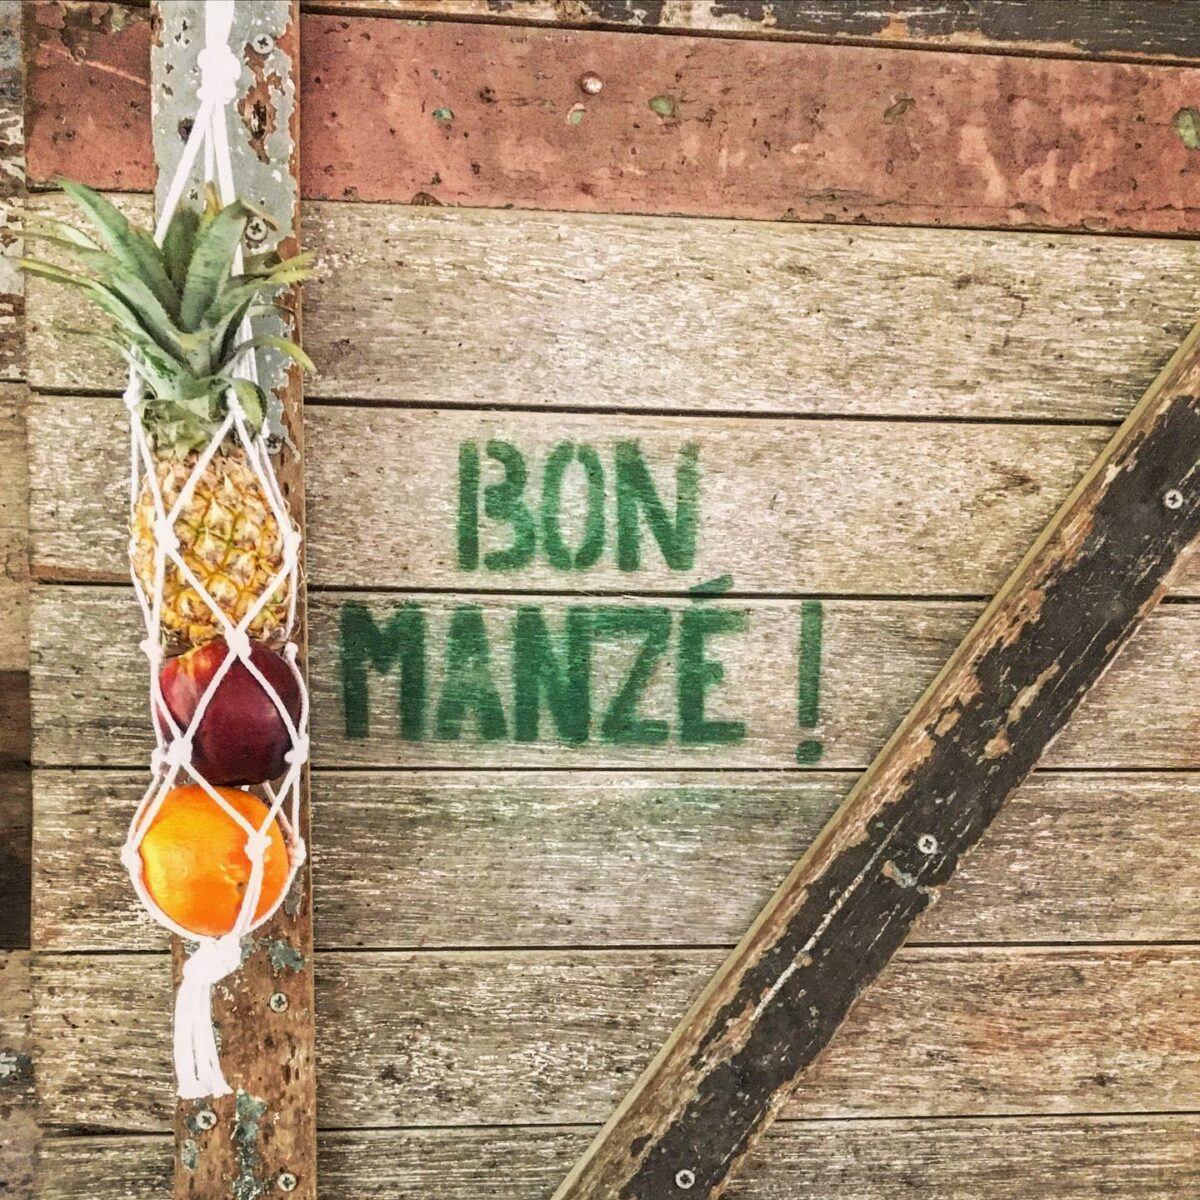 Otentik Eco Tent - Romantic Honeymoon Mauritius - Display of pineapple, apple and orange and with a sprayed-on sign title "bon manze!"